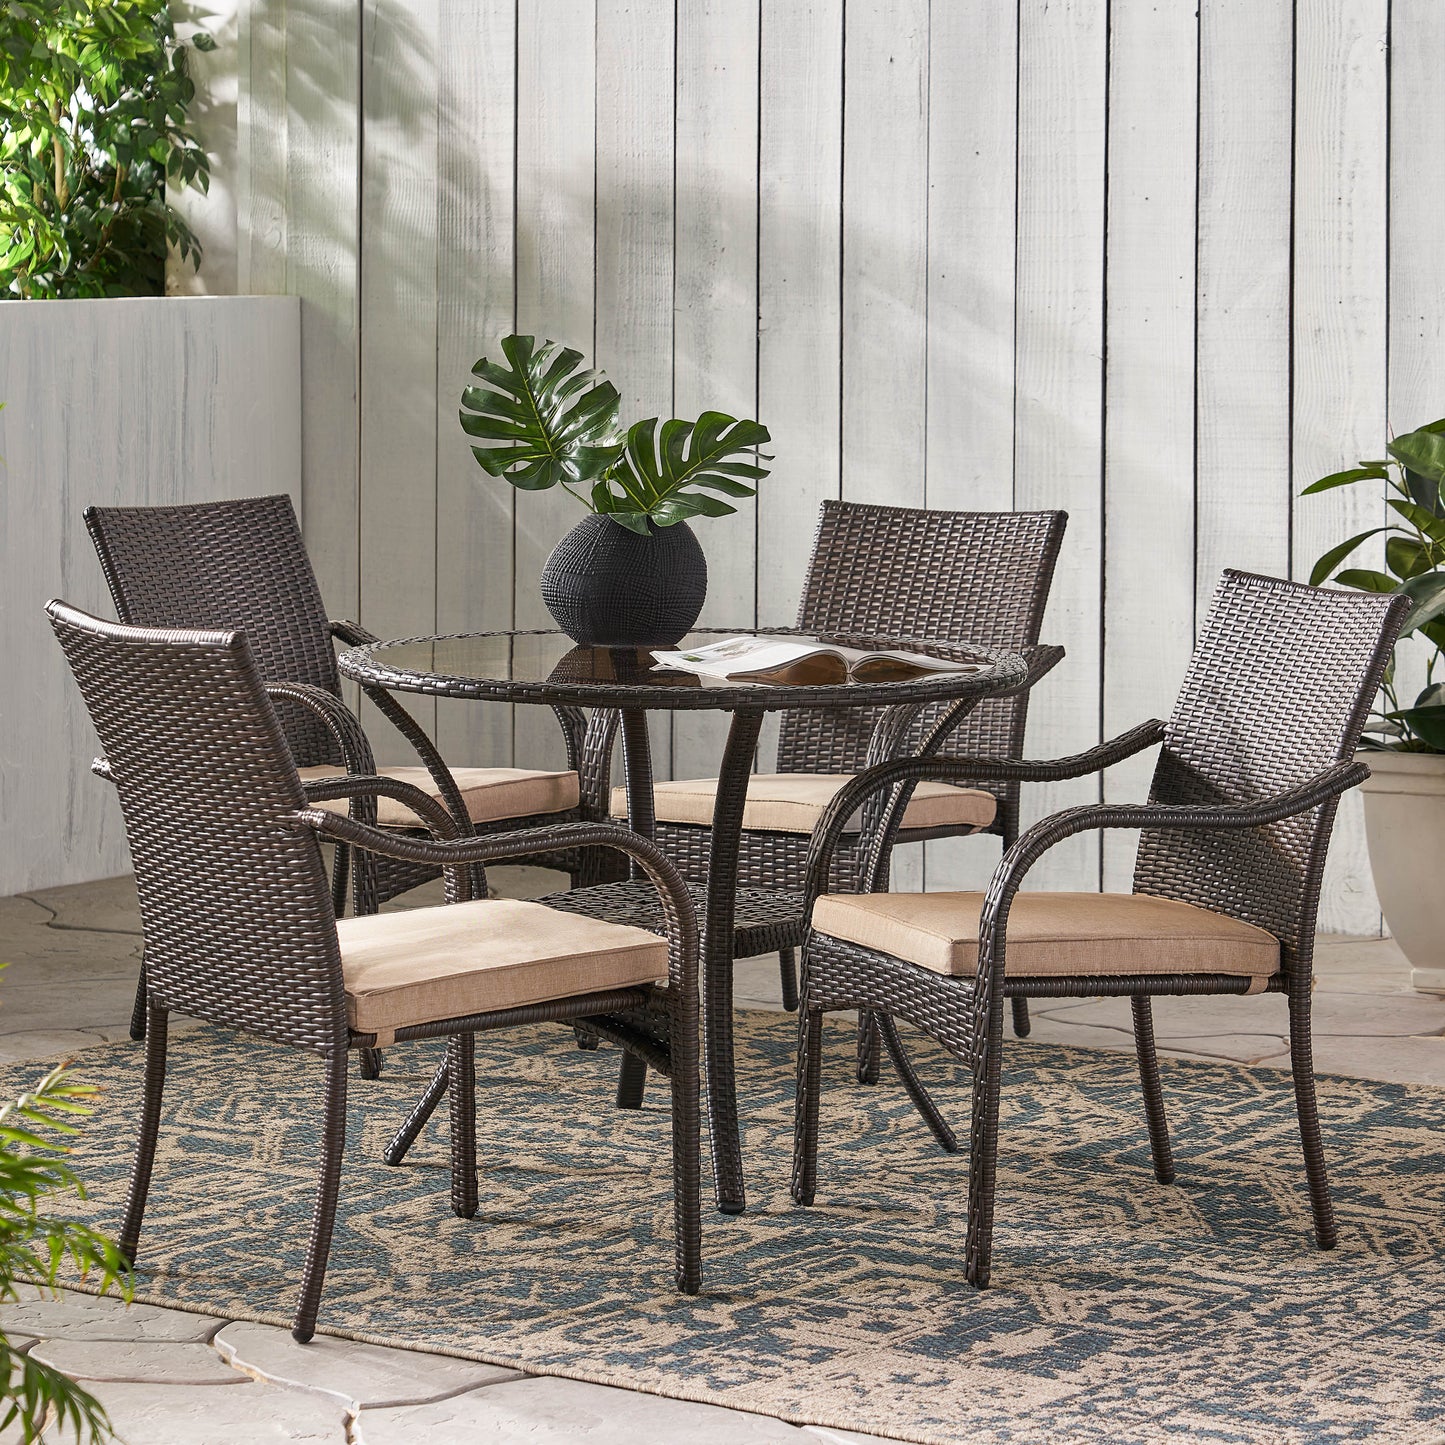 Novena Outdoor Brown Wicker 5-piece Dining Set with Cushions